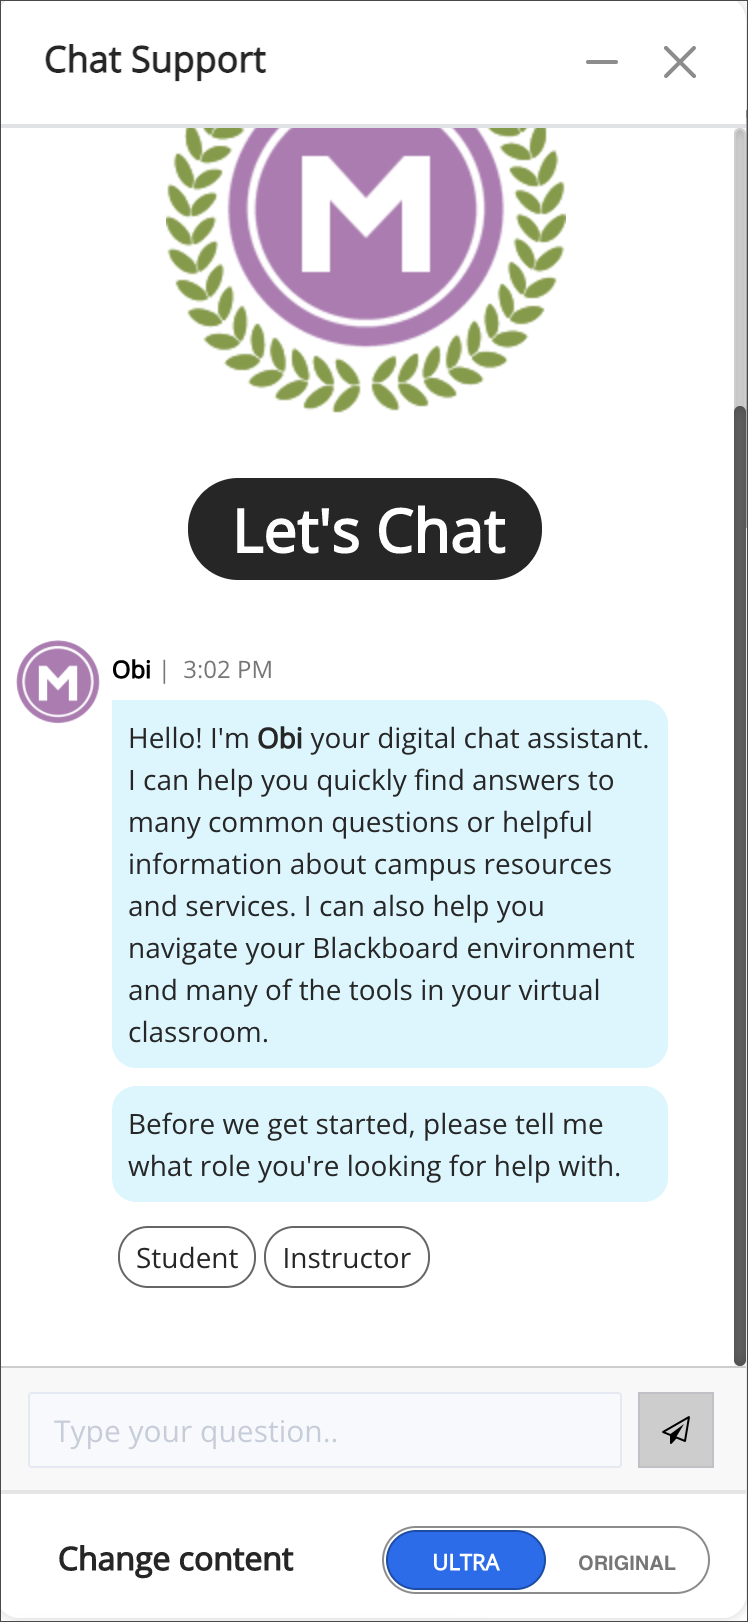 Chatbot welcome message and role selection prompt